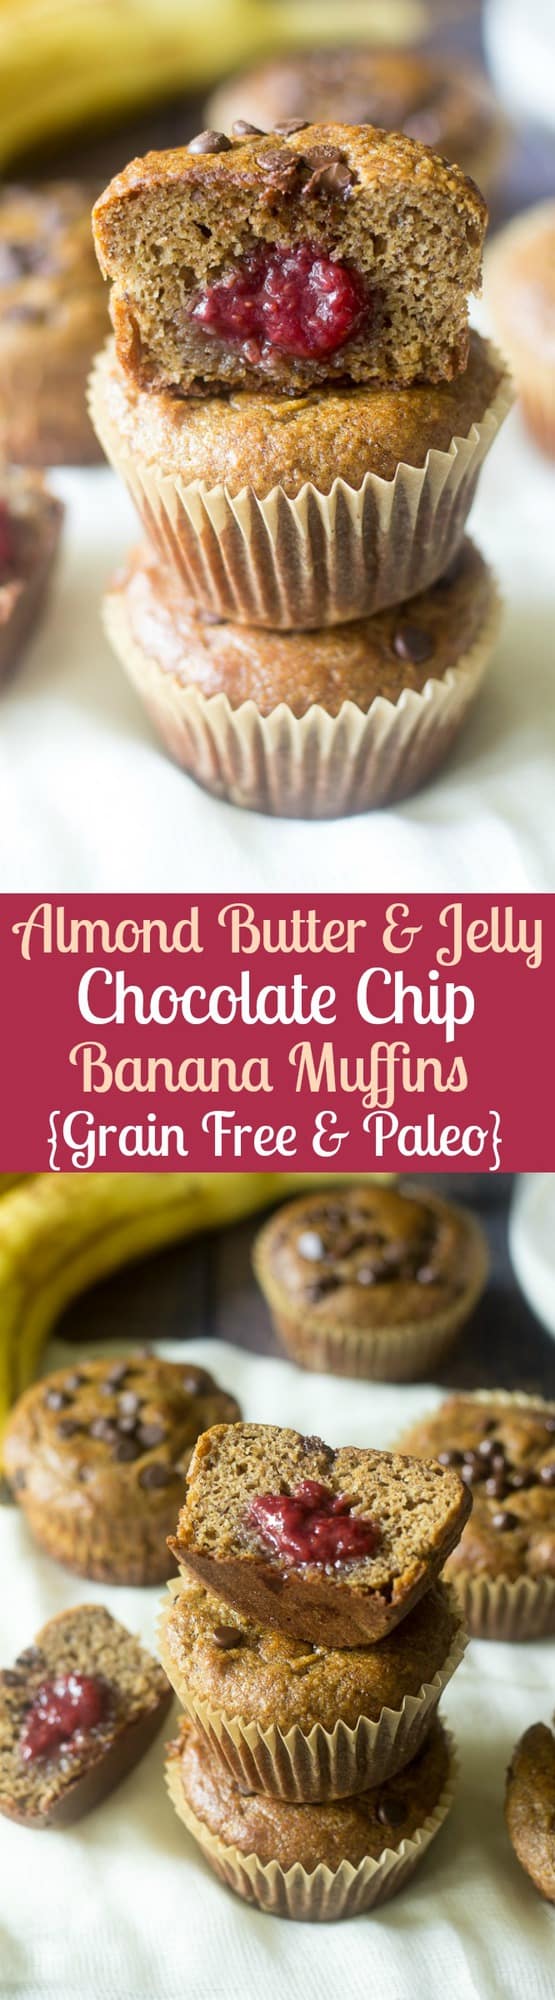 Almond Butter and Jelly Chocolate chip paleo banana muffins made with homemade jelly, grain free, refined sugar free, classic comfort food made healthy!